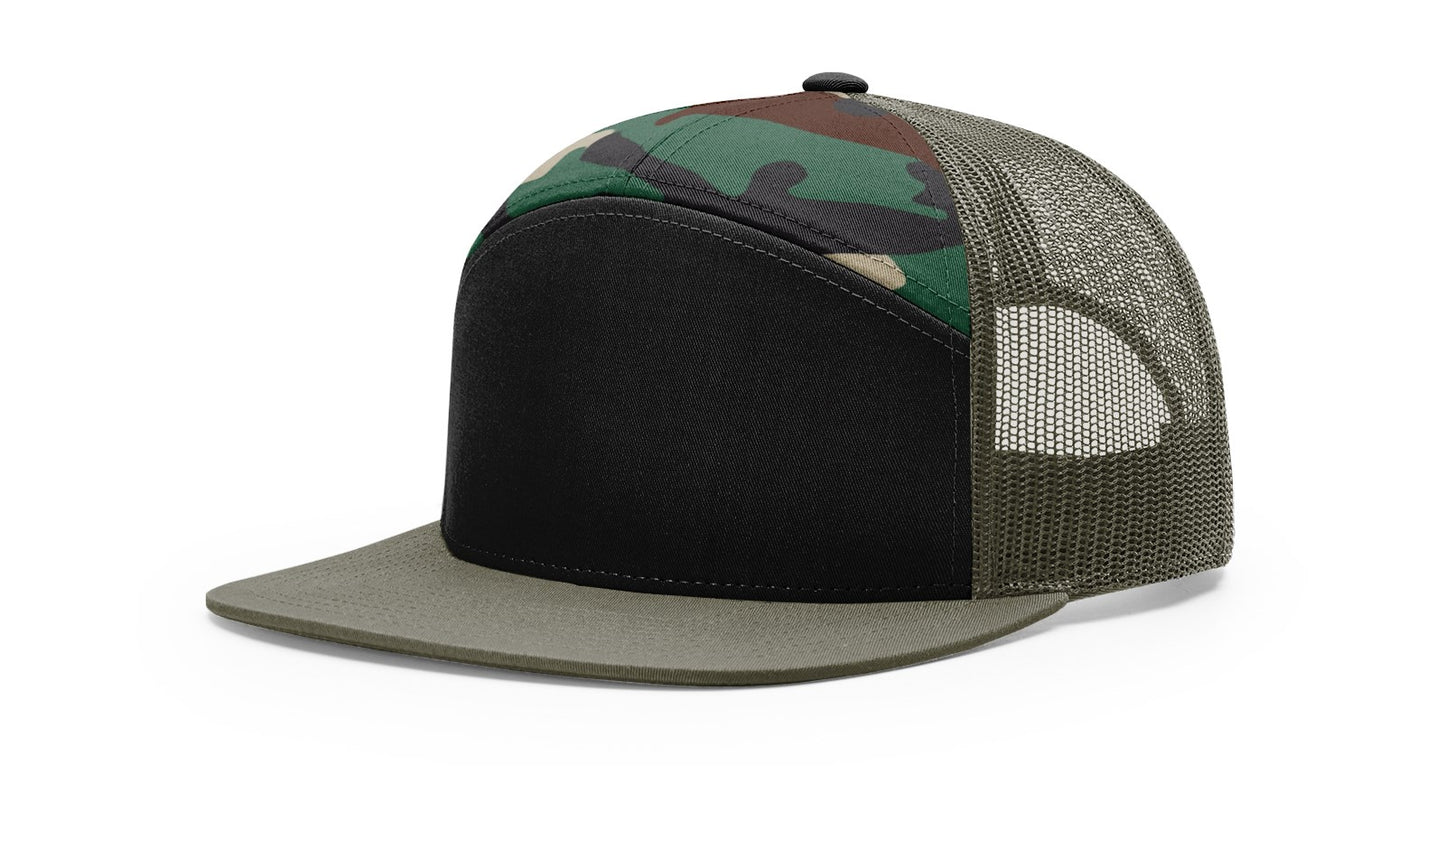 Richardson™ 168 - Black/Camo/Loden Snapback Hat With Premium Leather Patches